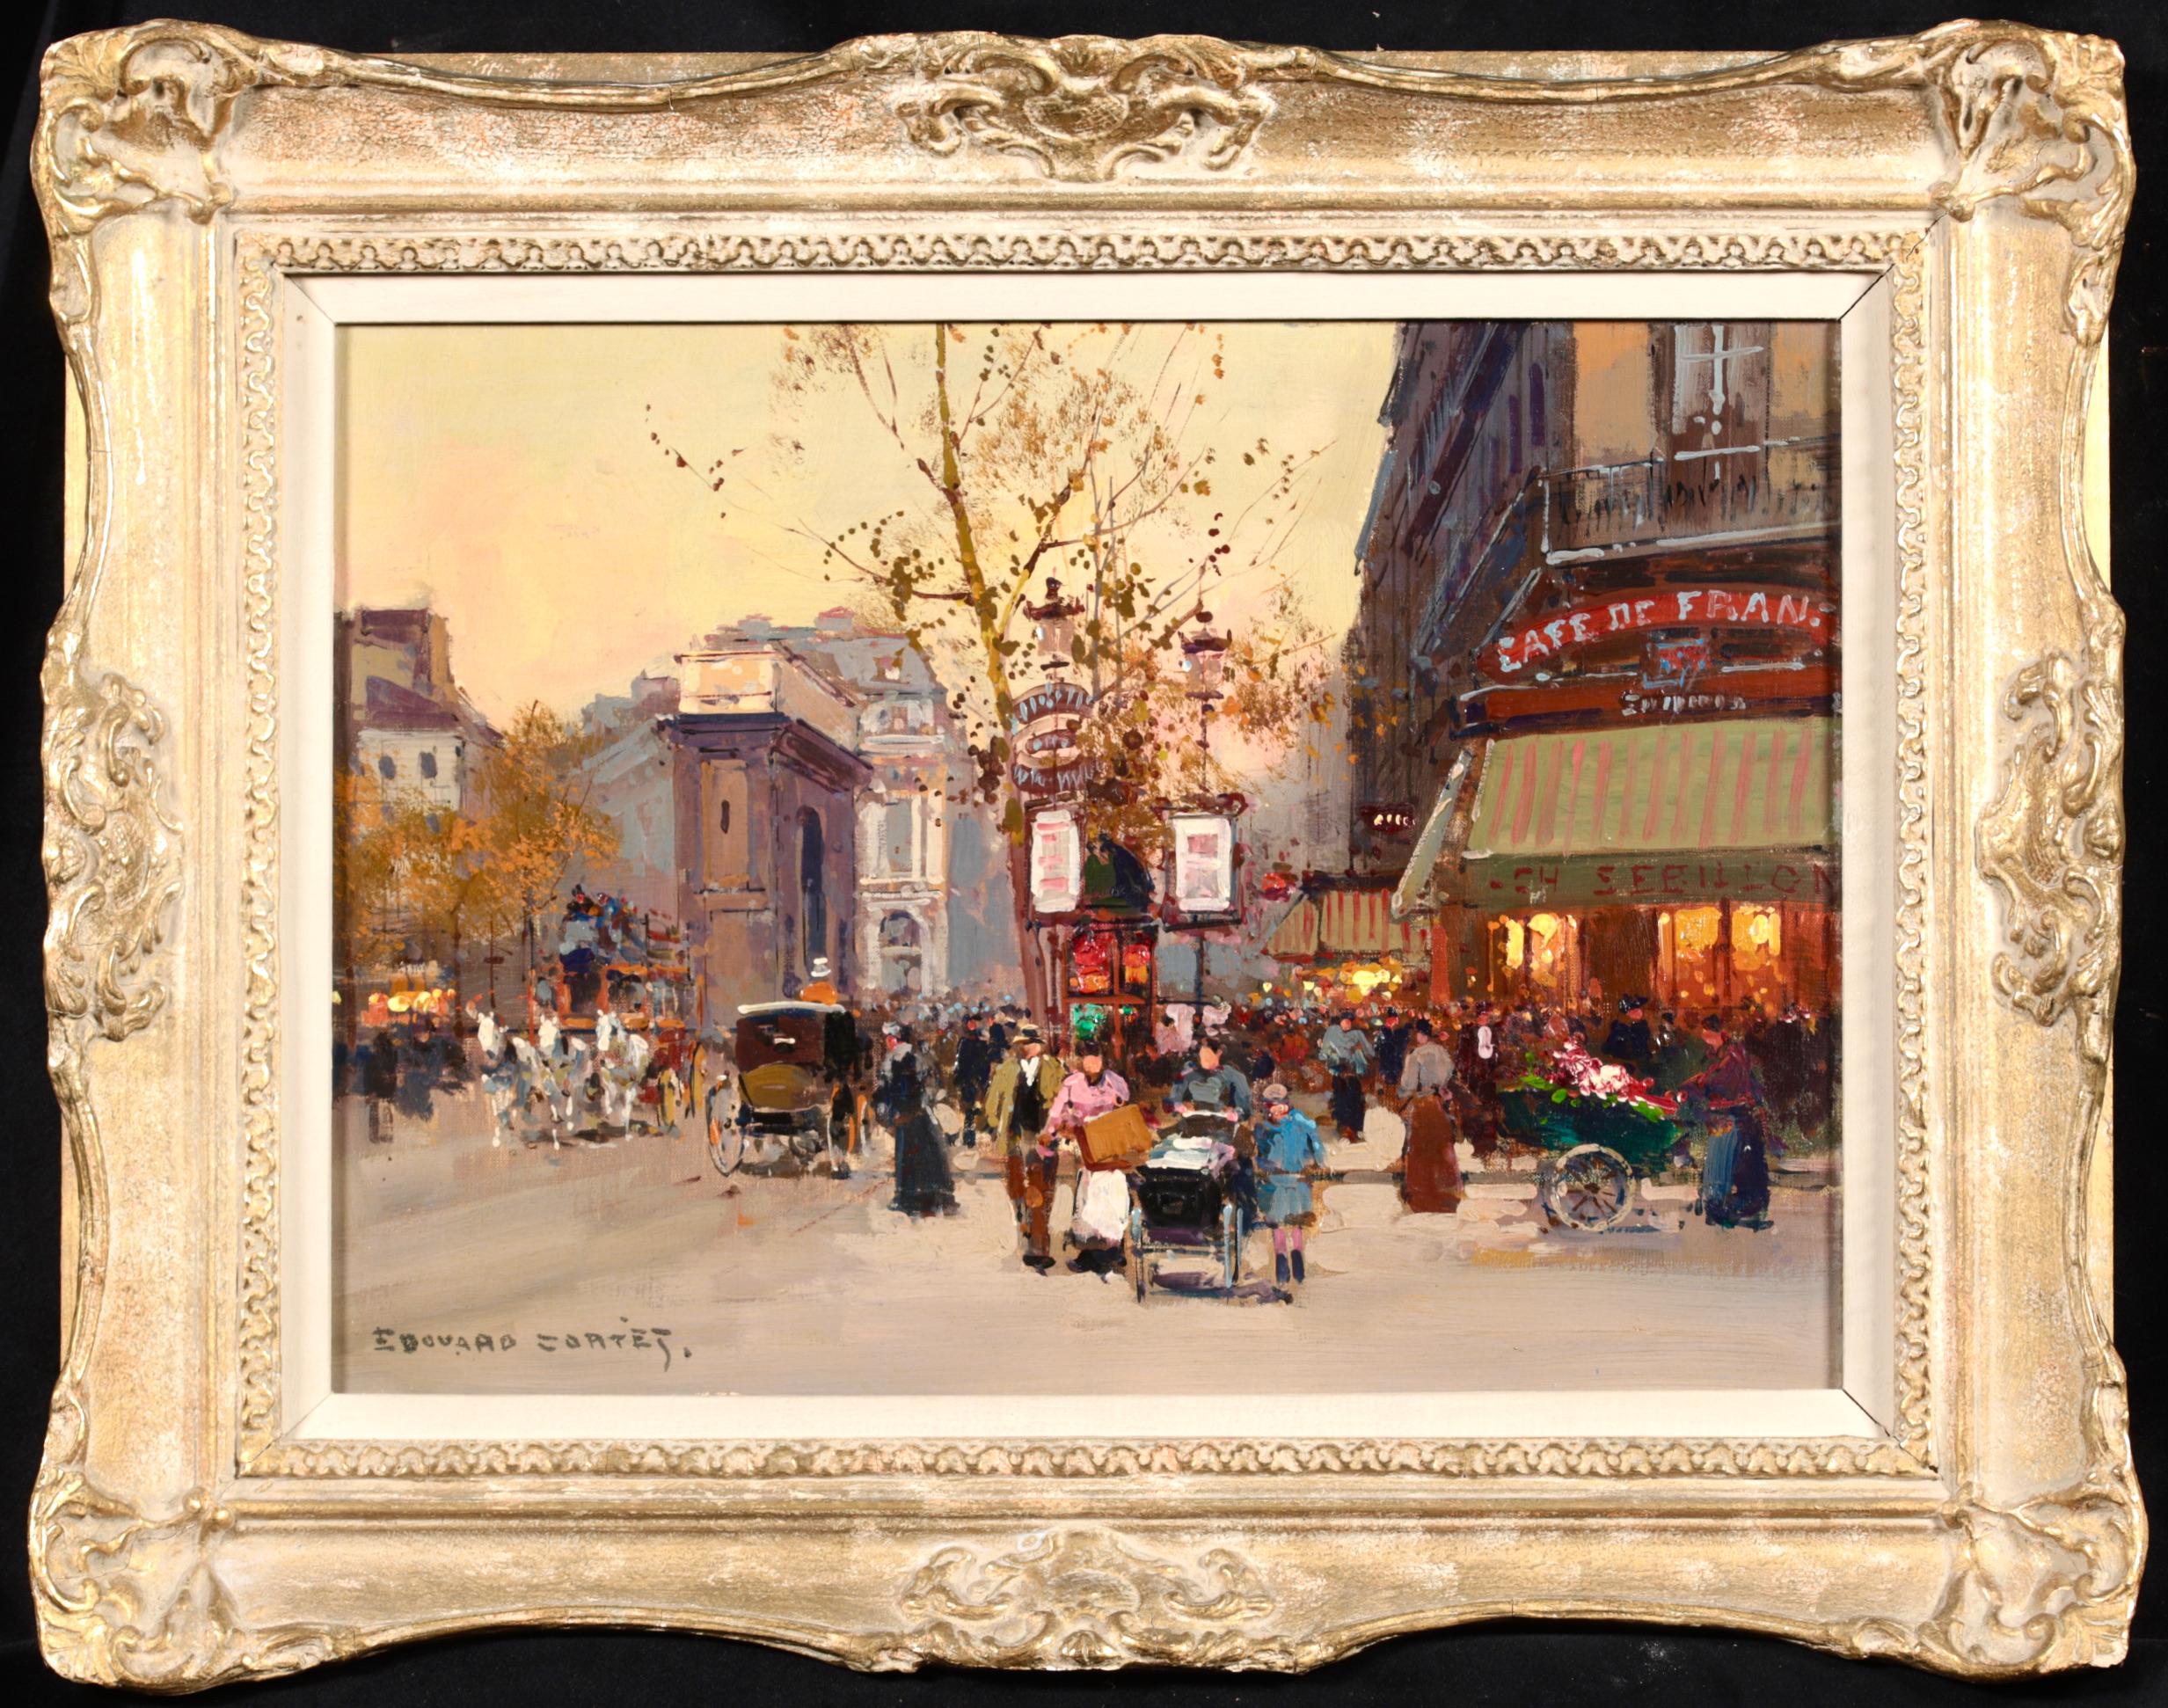 Signed figures in landscape circa 1940 by French impressionist painter Eduoard Cortes. The work depicts a view of the Porte de Saint-Martin monument in Paris, France. The bustling street scene is set as the sun starts to set. Horse and carriages can